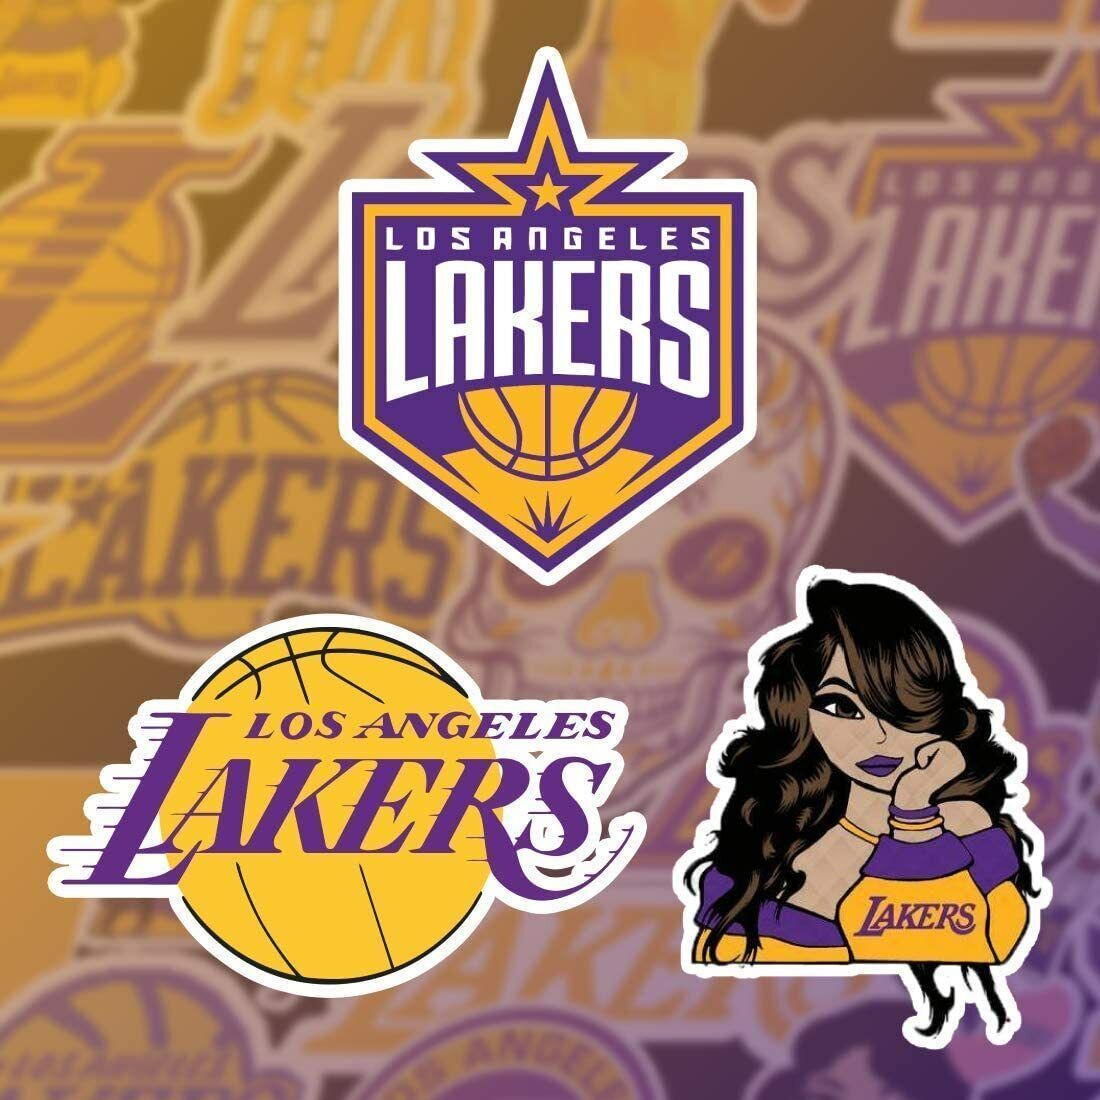 Lakers stickers on a Lakers background - Los Angeles Lakers